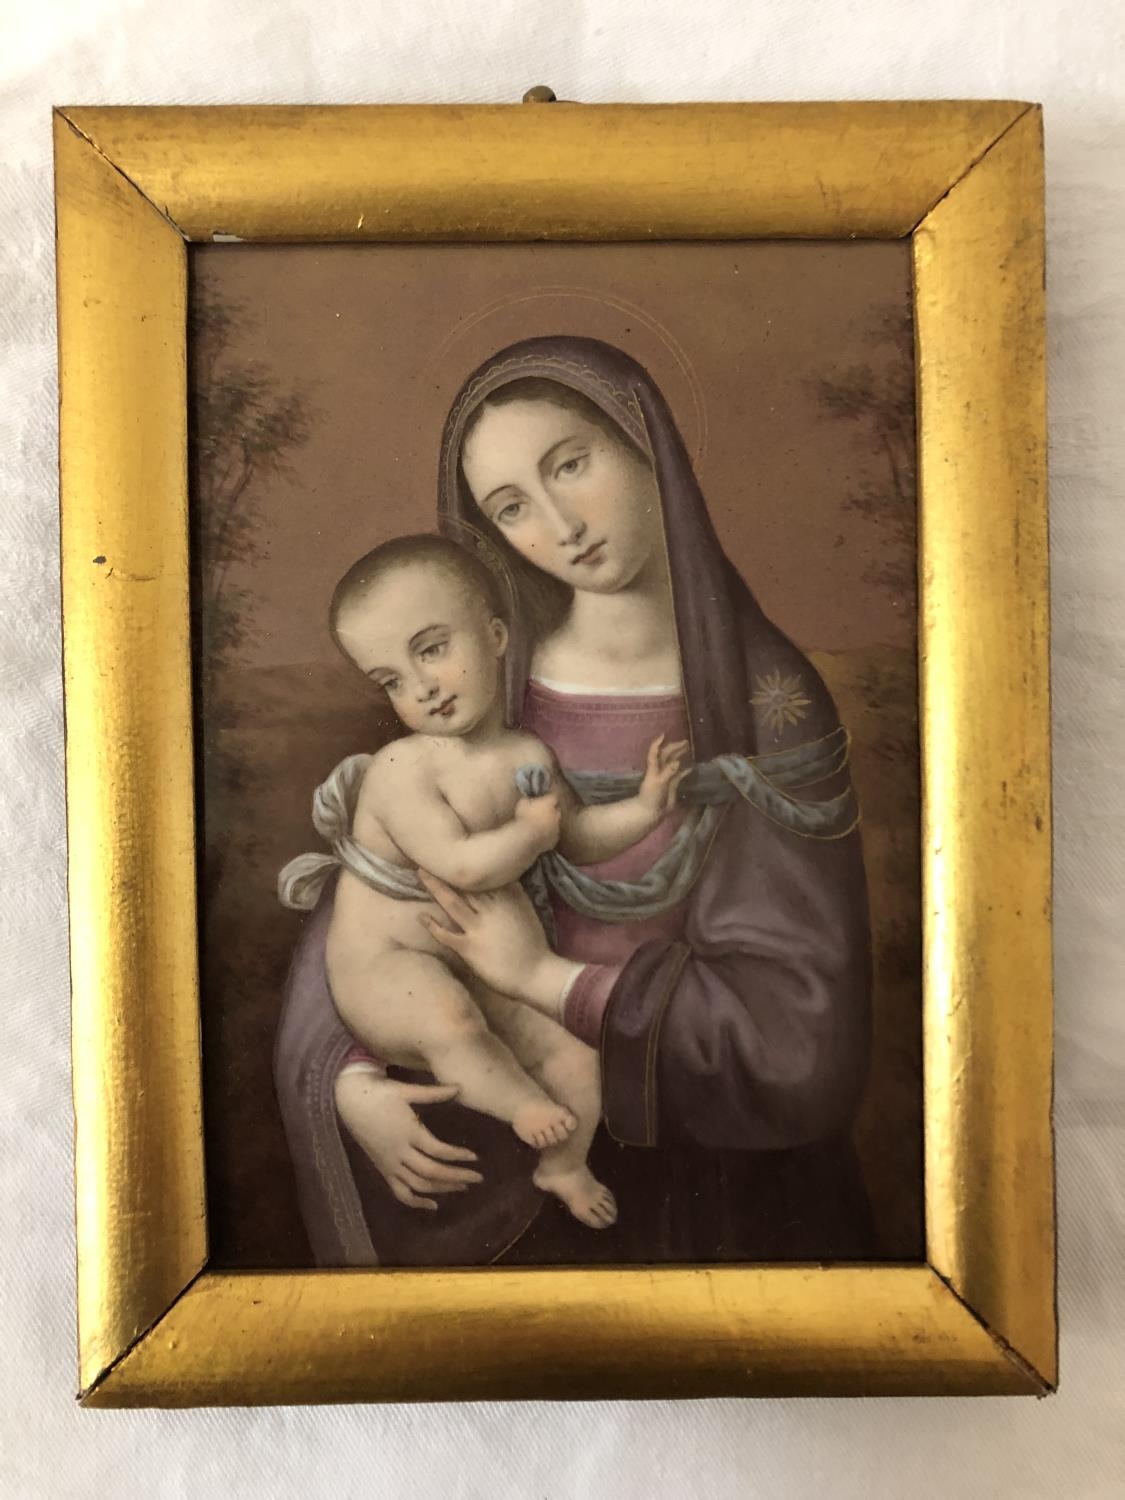 19th century hand-painted and gilt plaque of Virgin Mary holding infant Jesus, 14.5 x 10.5 cm,